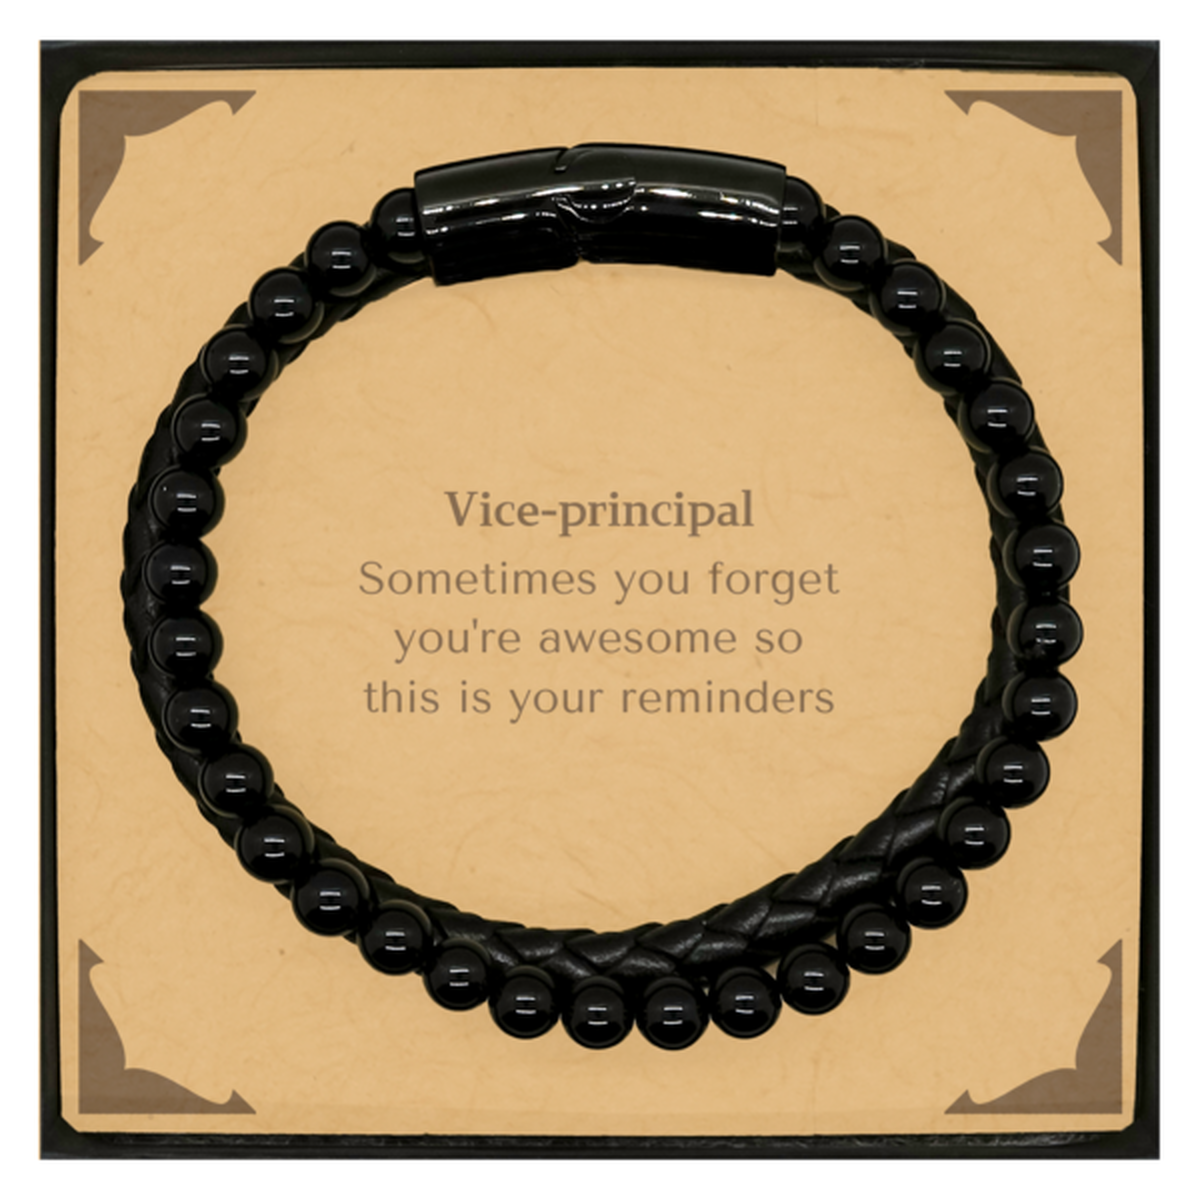 Sentimental Vice-principal Stone Leather Bracelets, Vice-principal Sometimes you forget you're awesome so this is your reminders, Graduation Christmas Birthday Gifts for Vice-principal, Men, Women, Coworkers